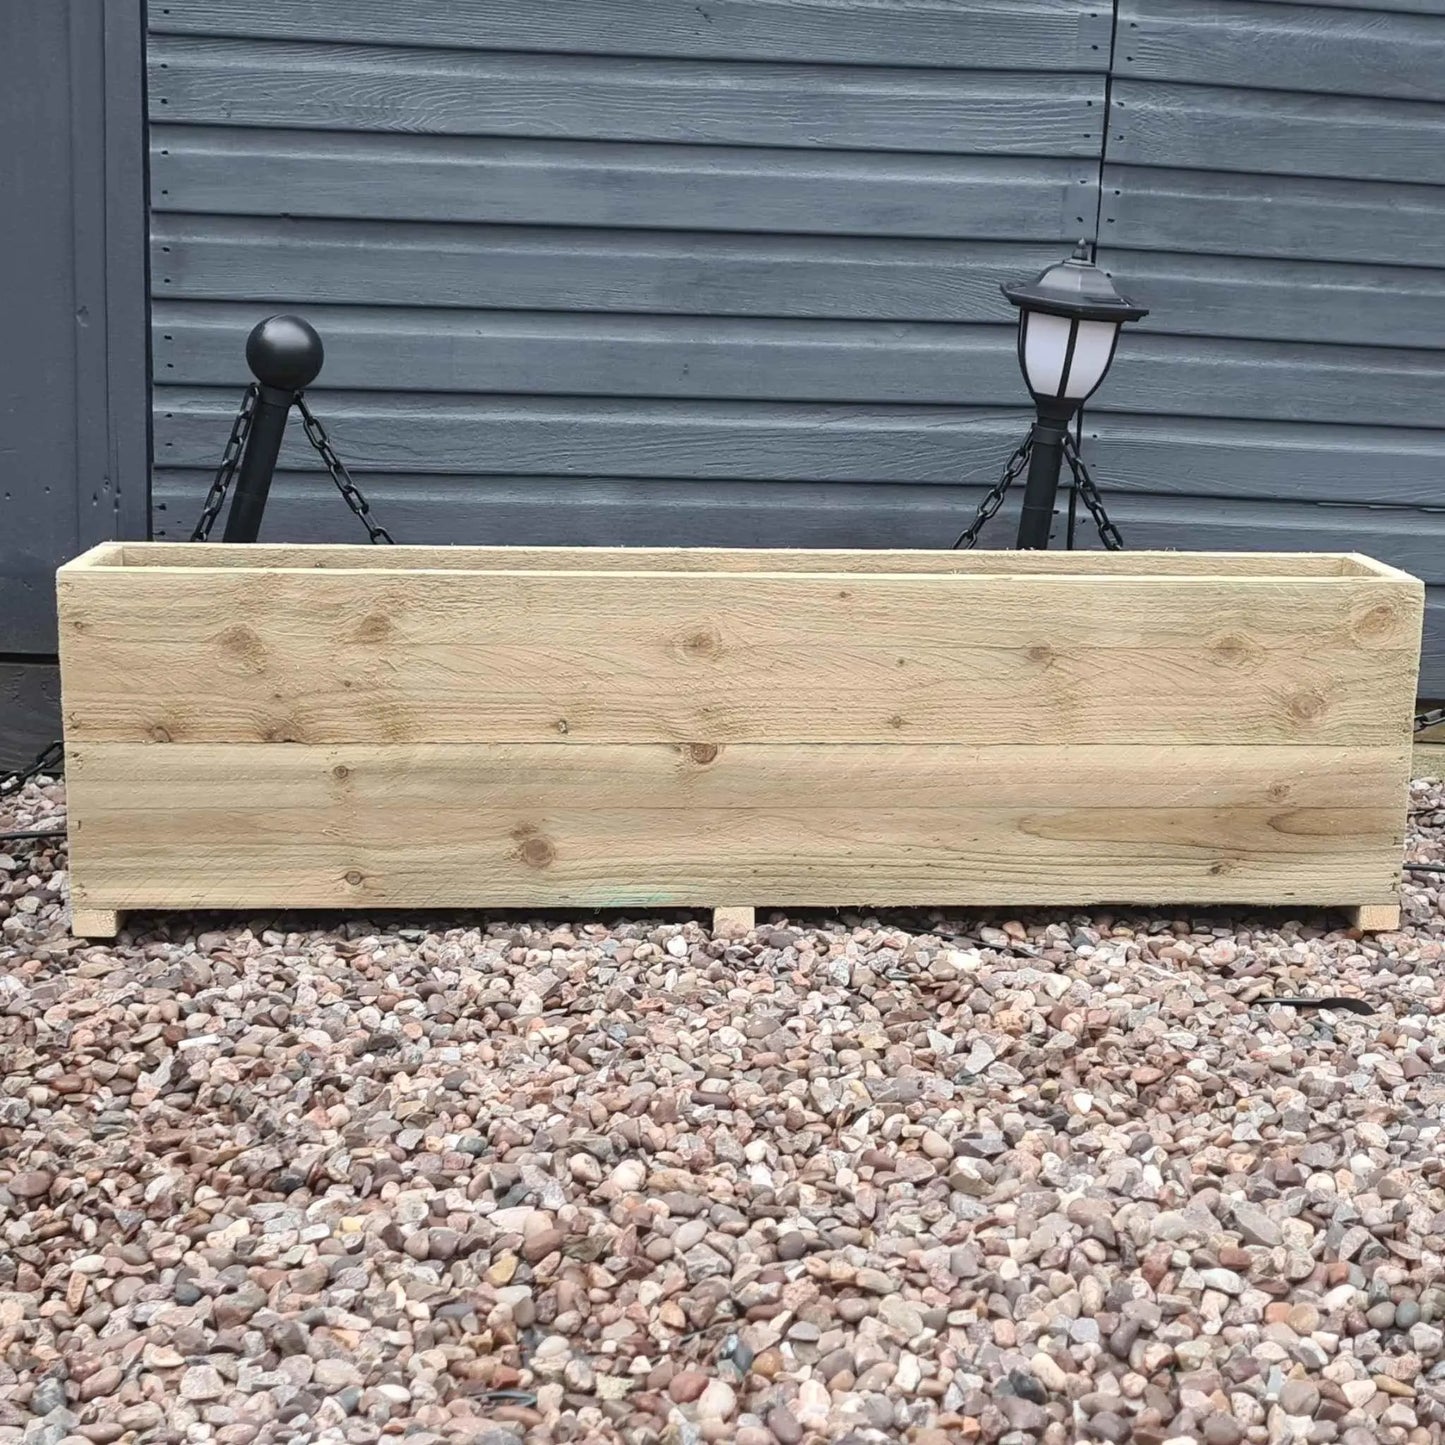 Large Planters wooden garden planters various sizes - Summer Wooden Planters